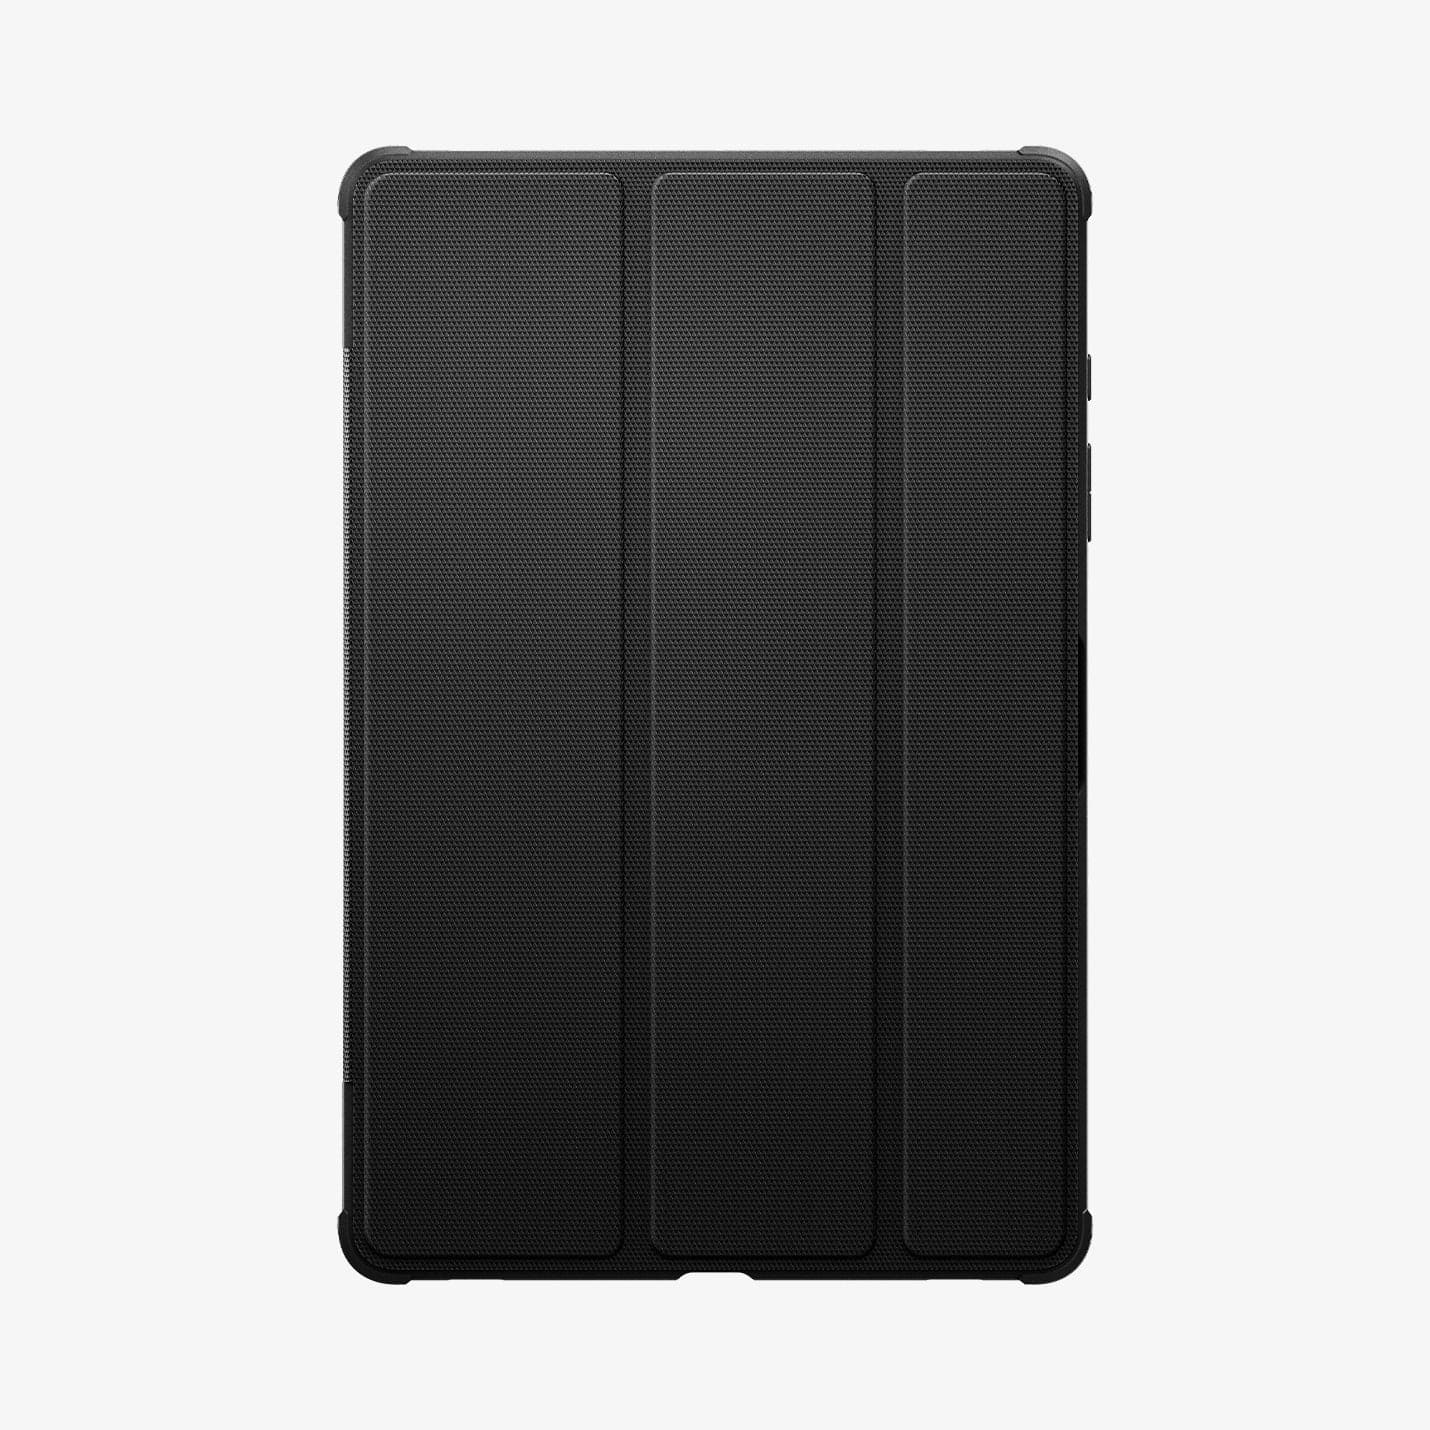 ACS06540 - Galaxy Tab S9 Case Rugged Armor Pro in black showing the front